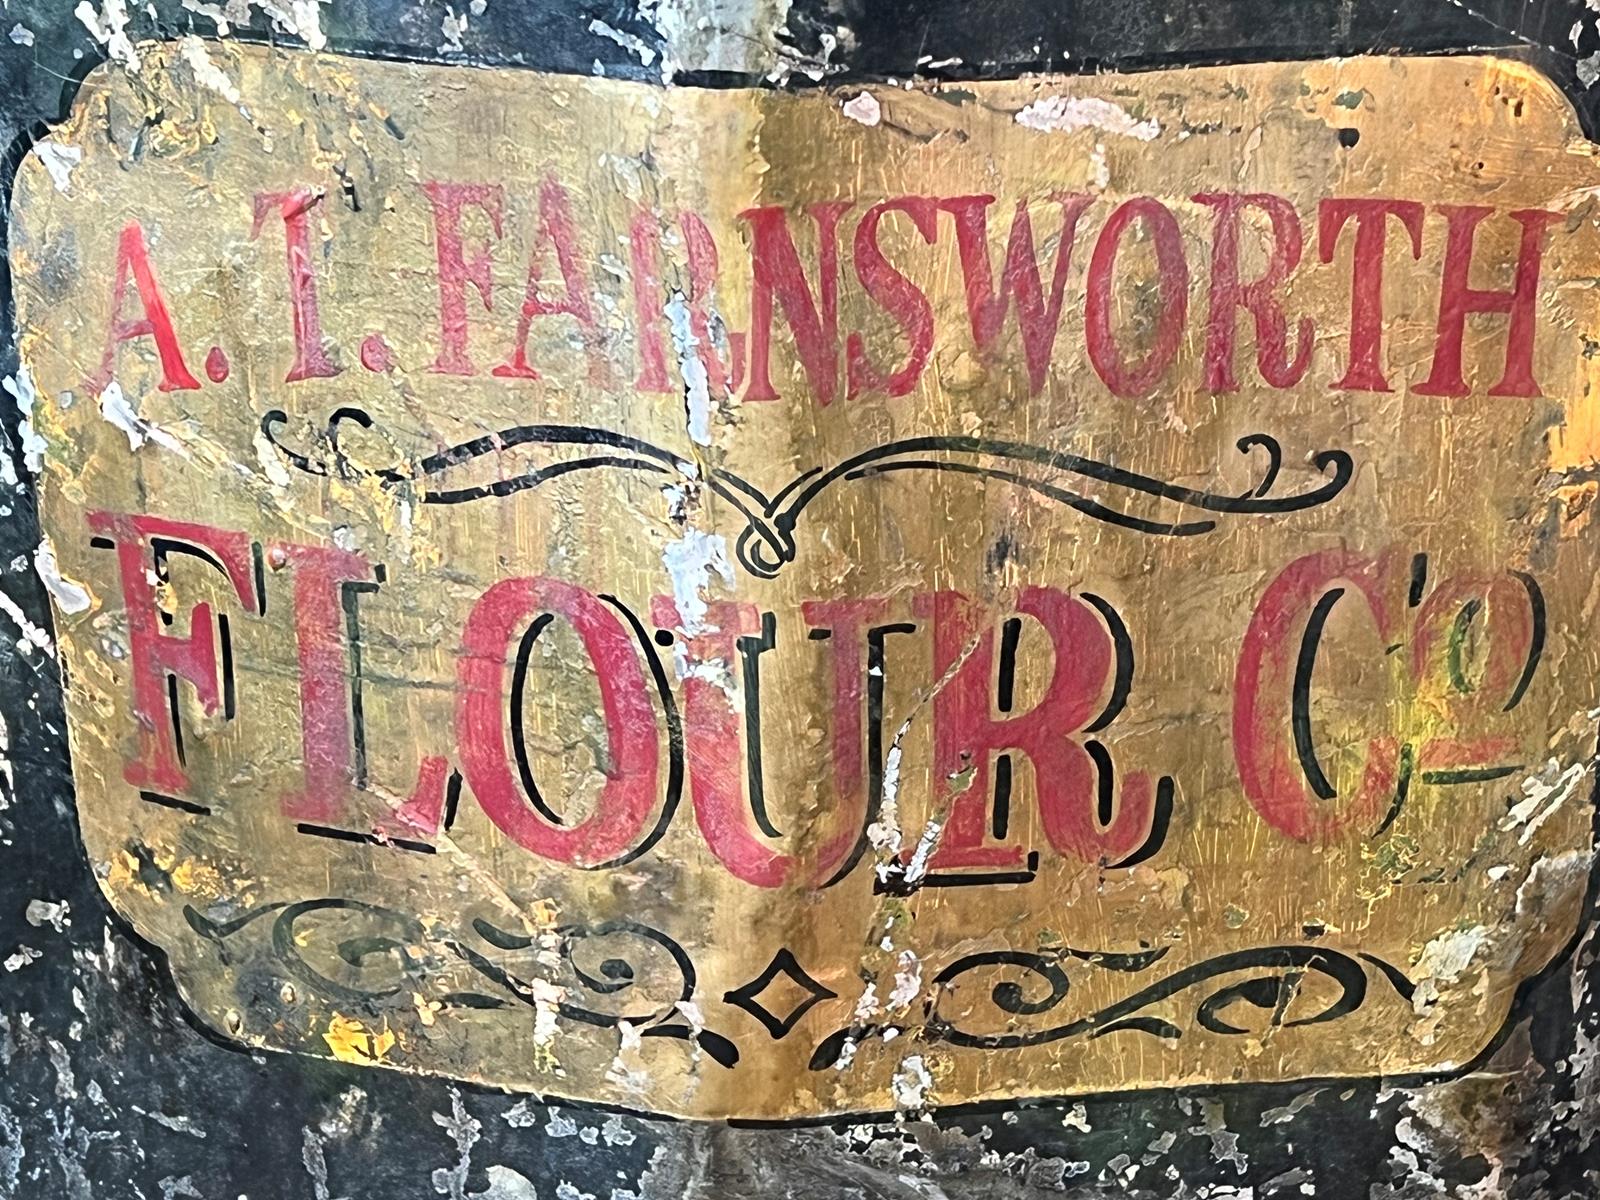 A close-up of the label and tagging on an old flour bin